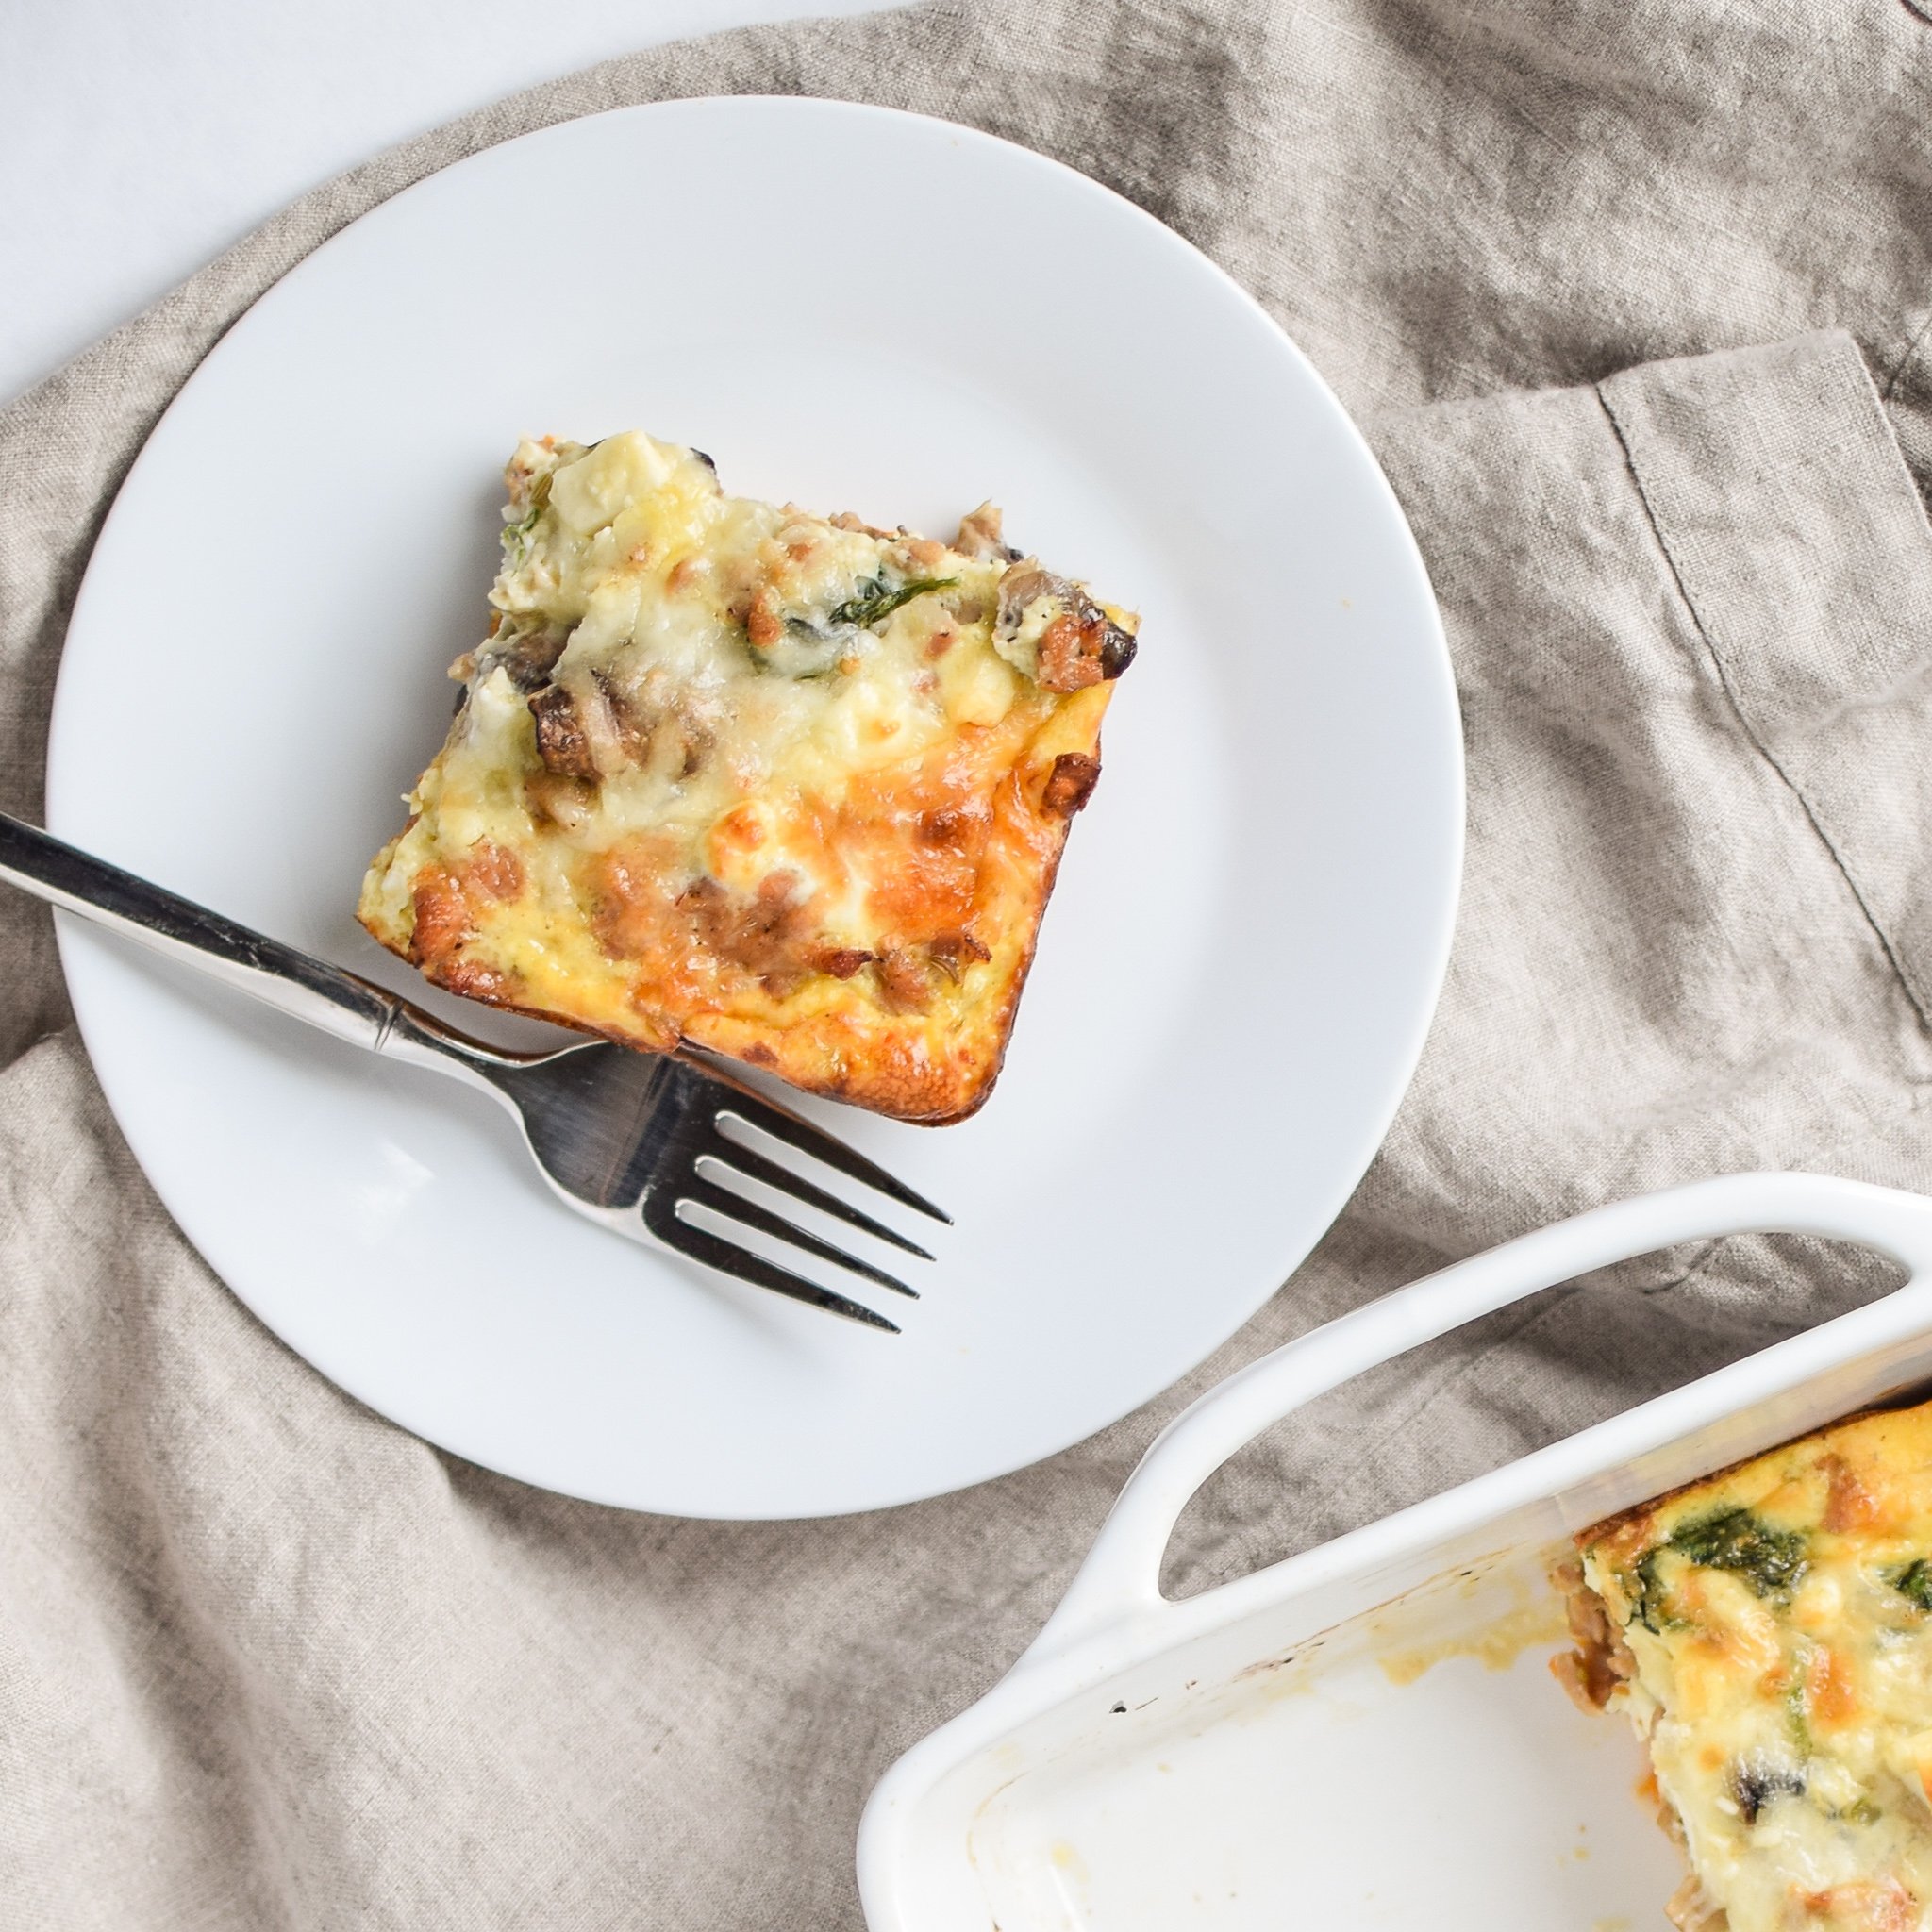 Spinach Feta Chicken Sausage Breakfast Casserole with Sweet Potato Crust - A tasty breakfast favorite for a crowd (or meal prepped!) with an easy sweet potato crust! - ProjectMealPlan.com